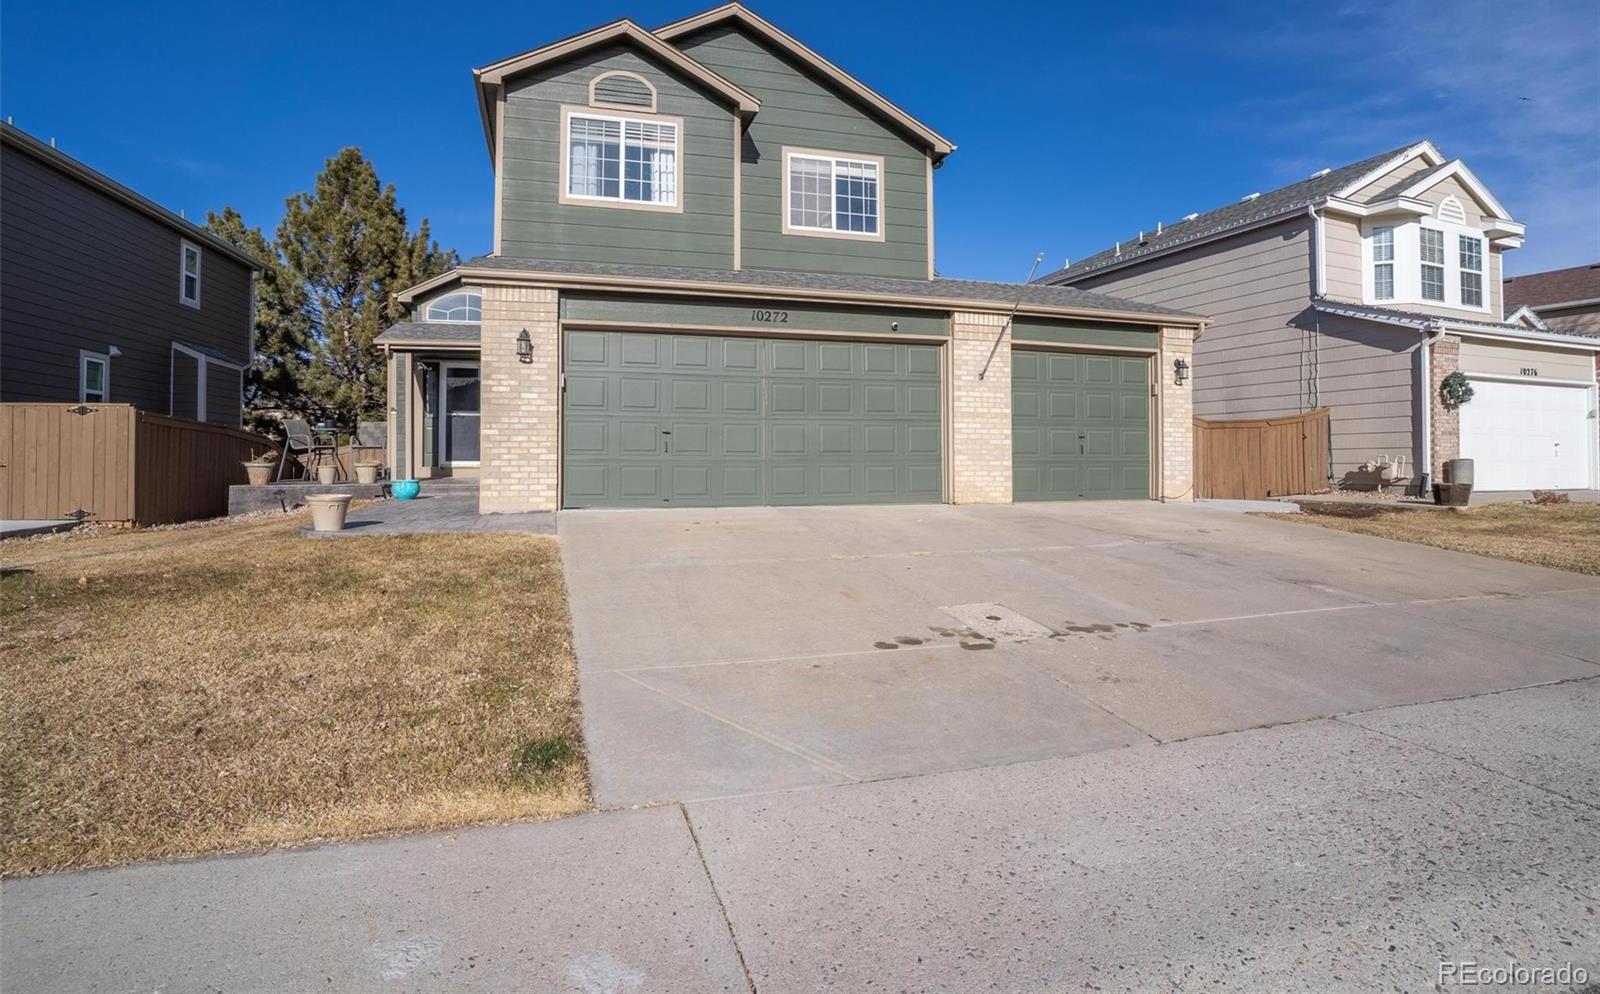 Photo one of 10272 Woodrose Ln Highlands Ranch CO 80129 | MLS 2326917